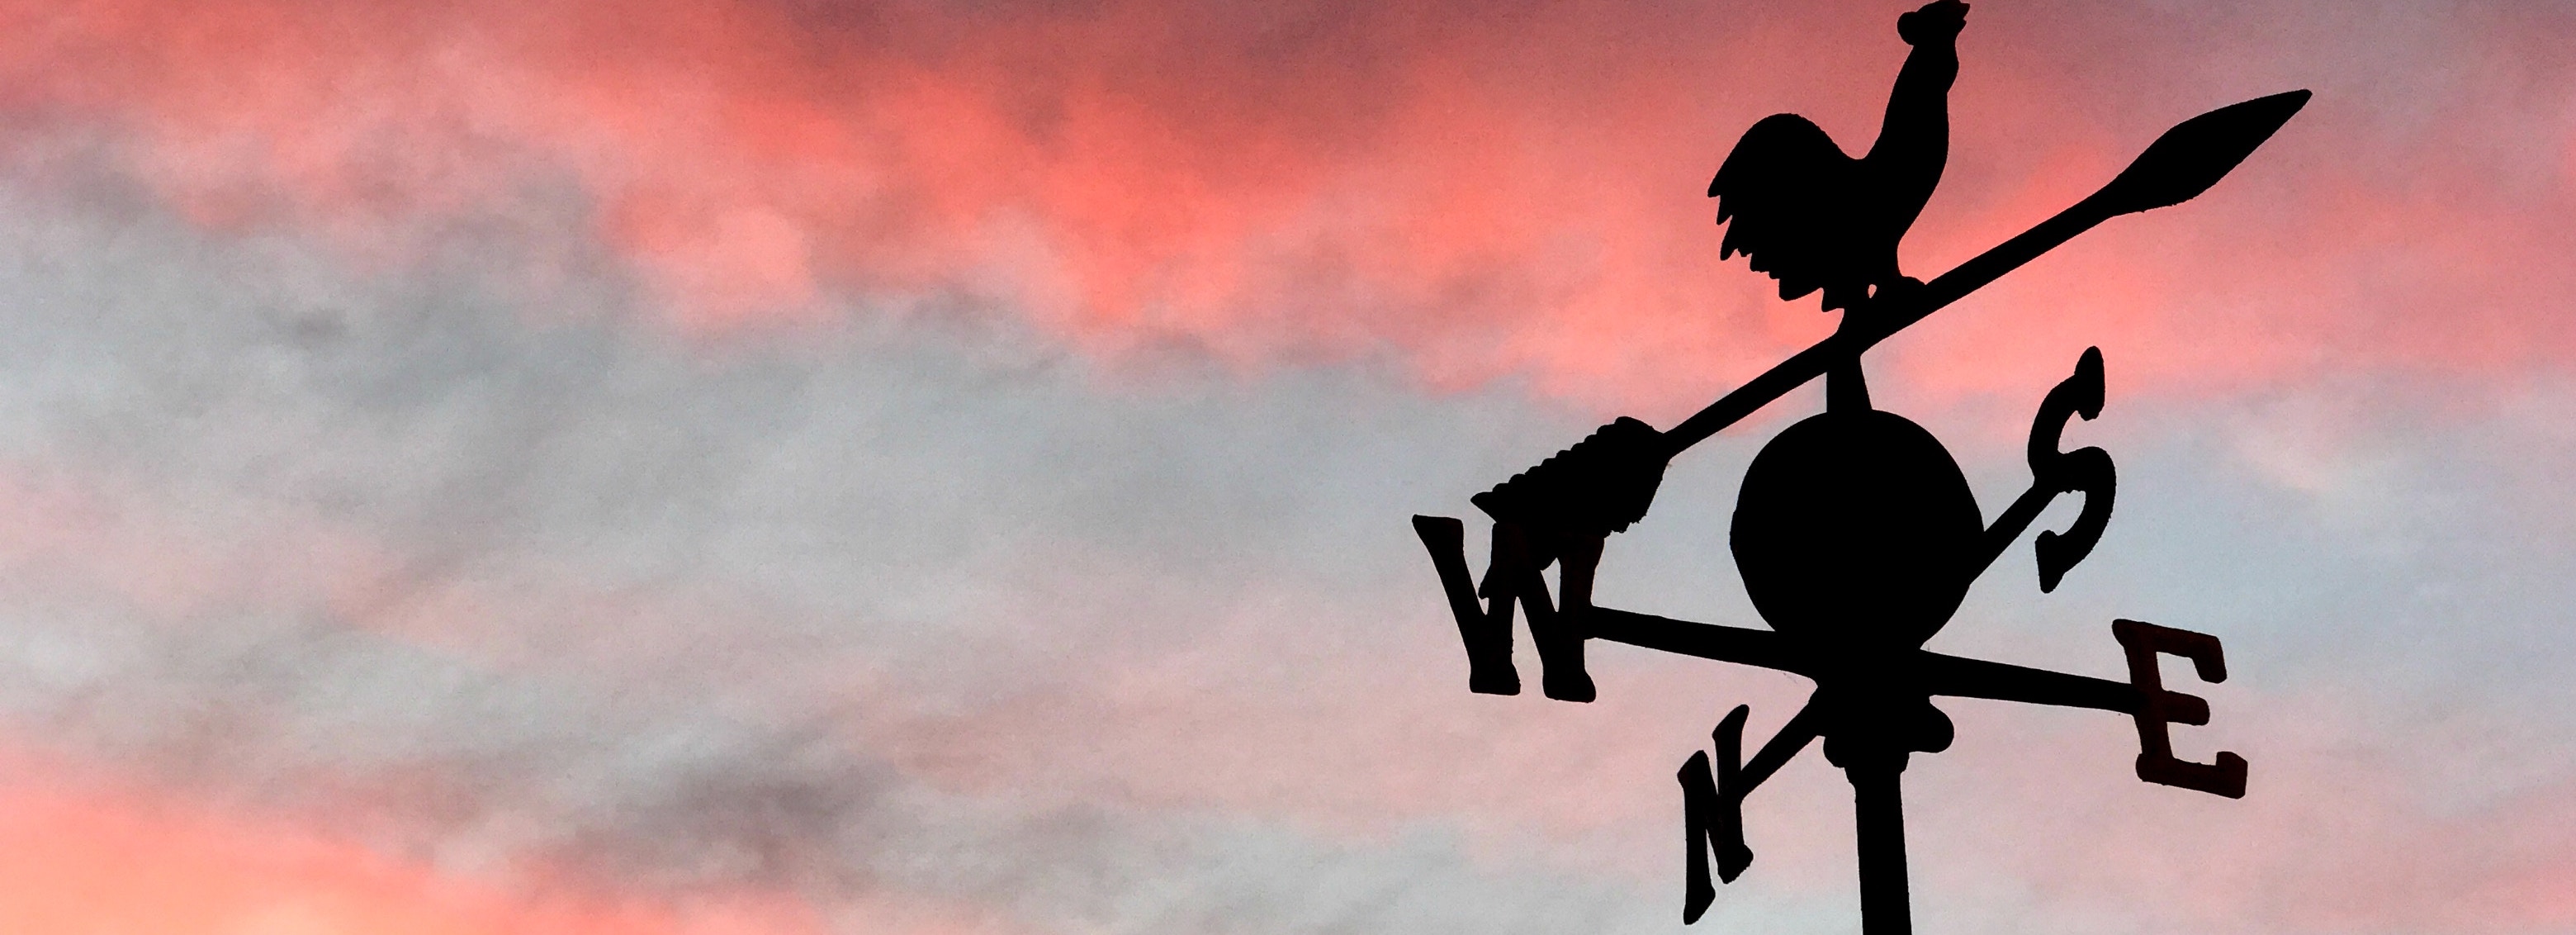 The traditional weathervane helps us forecast what is coming